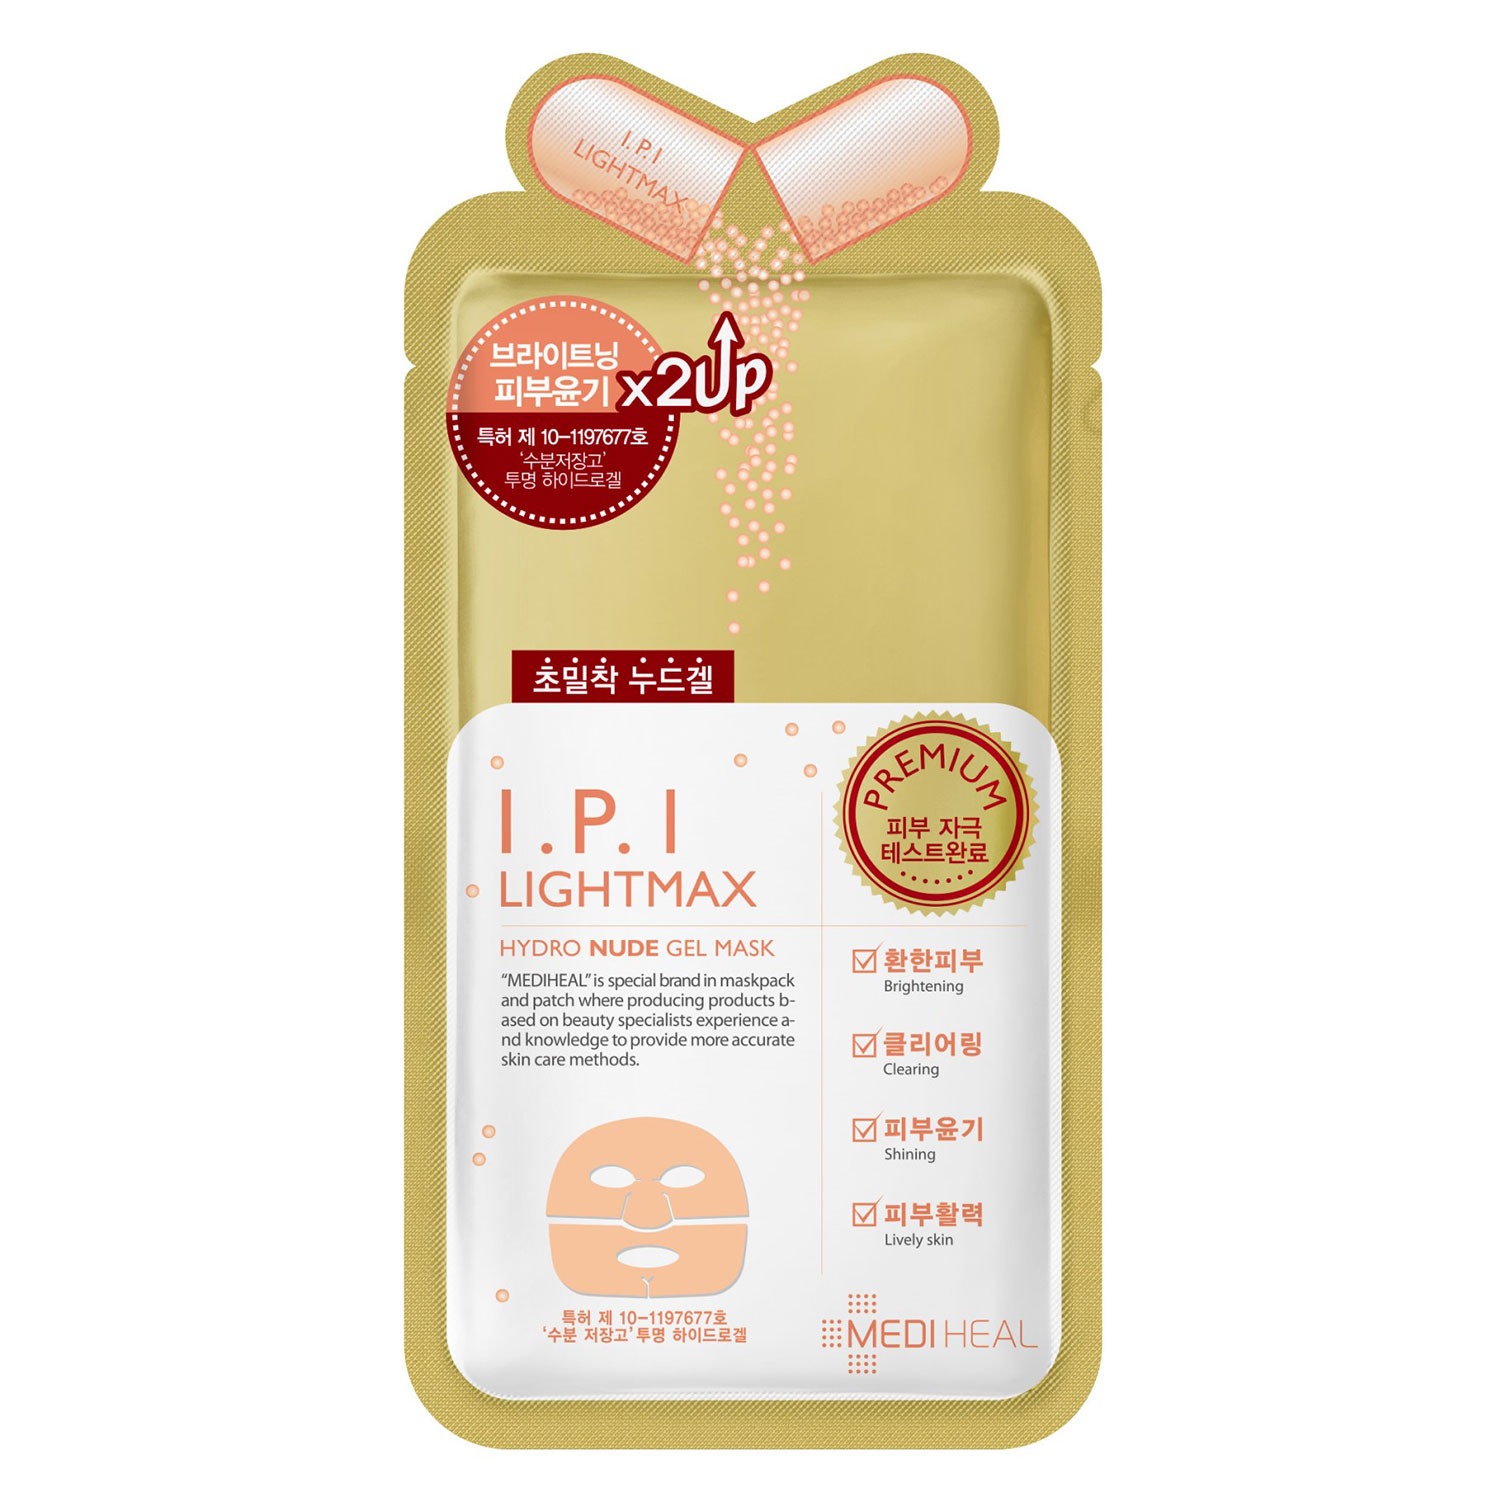 Mặt Nạ Trong Suốt Cao Cấp Mediheal I.P.I Lightmax Nude Gel Mask